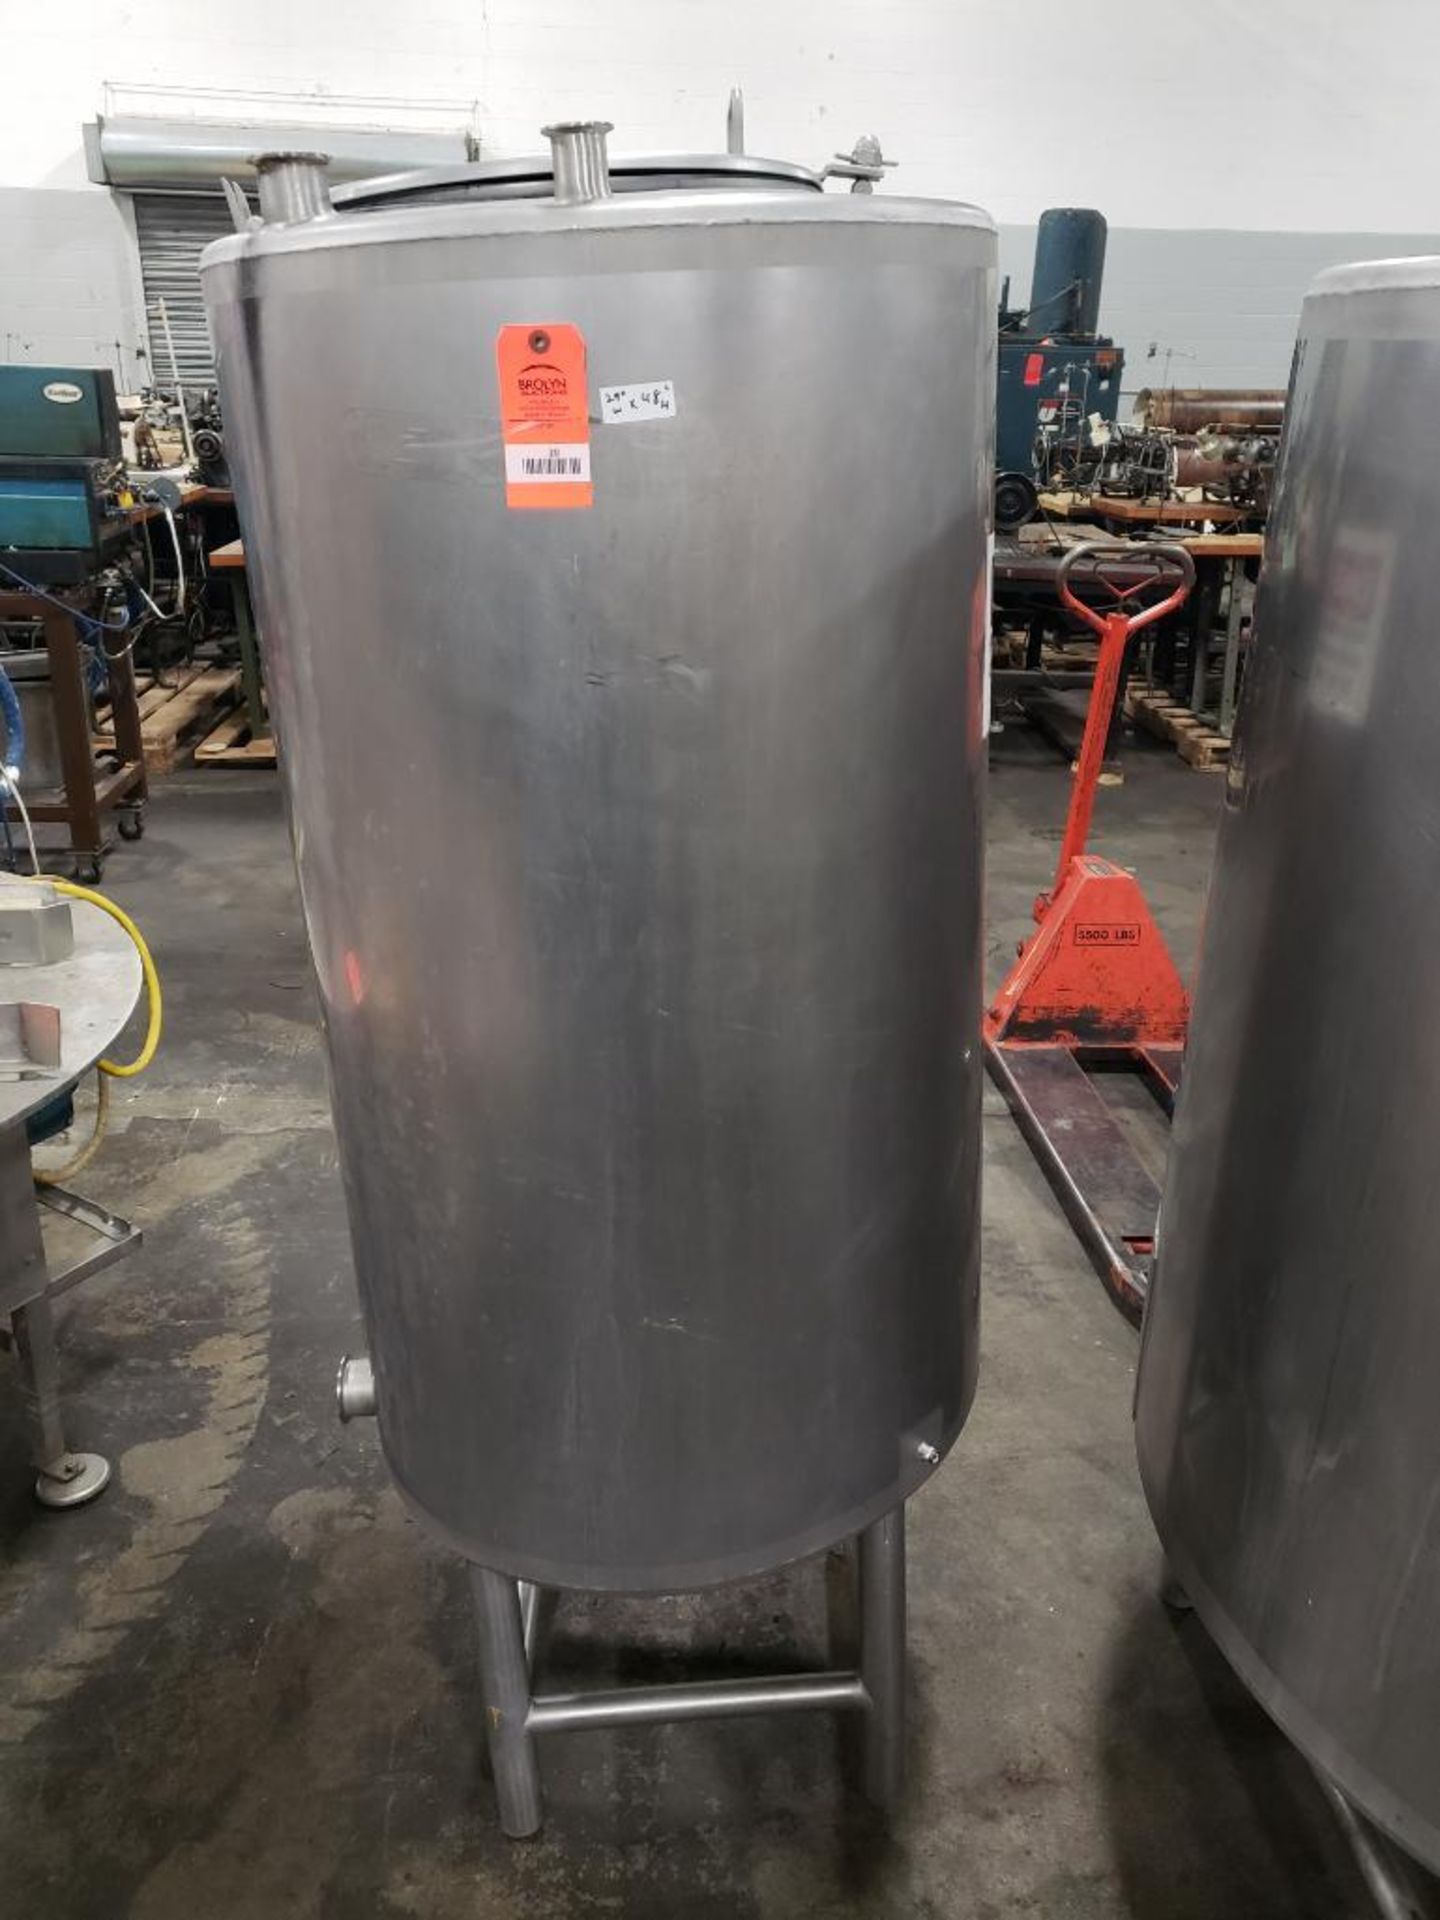 Approx 135 gallon Stainless steel holding tank. Approx dimensions 47in wide by 48in tall.